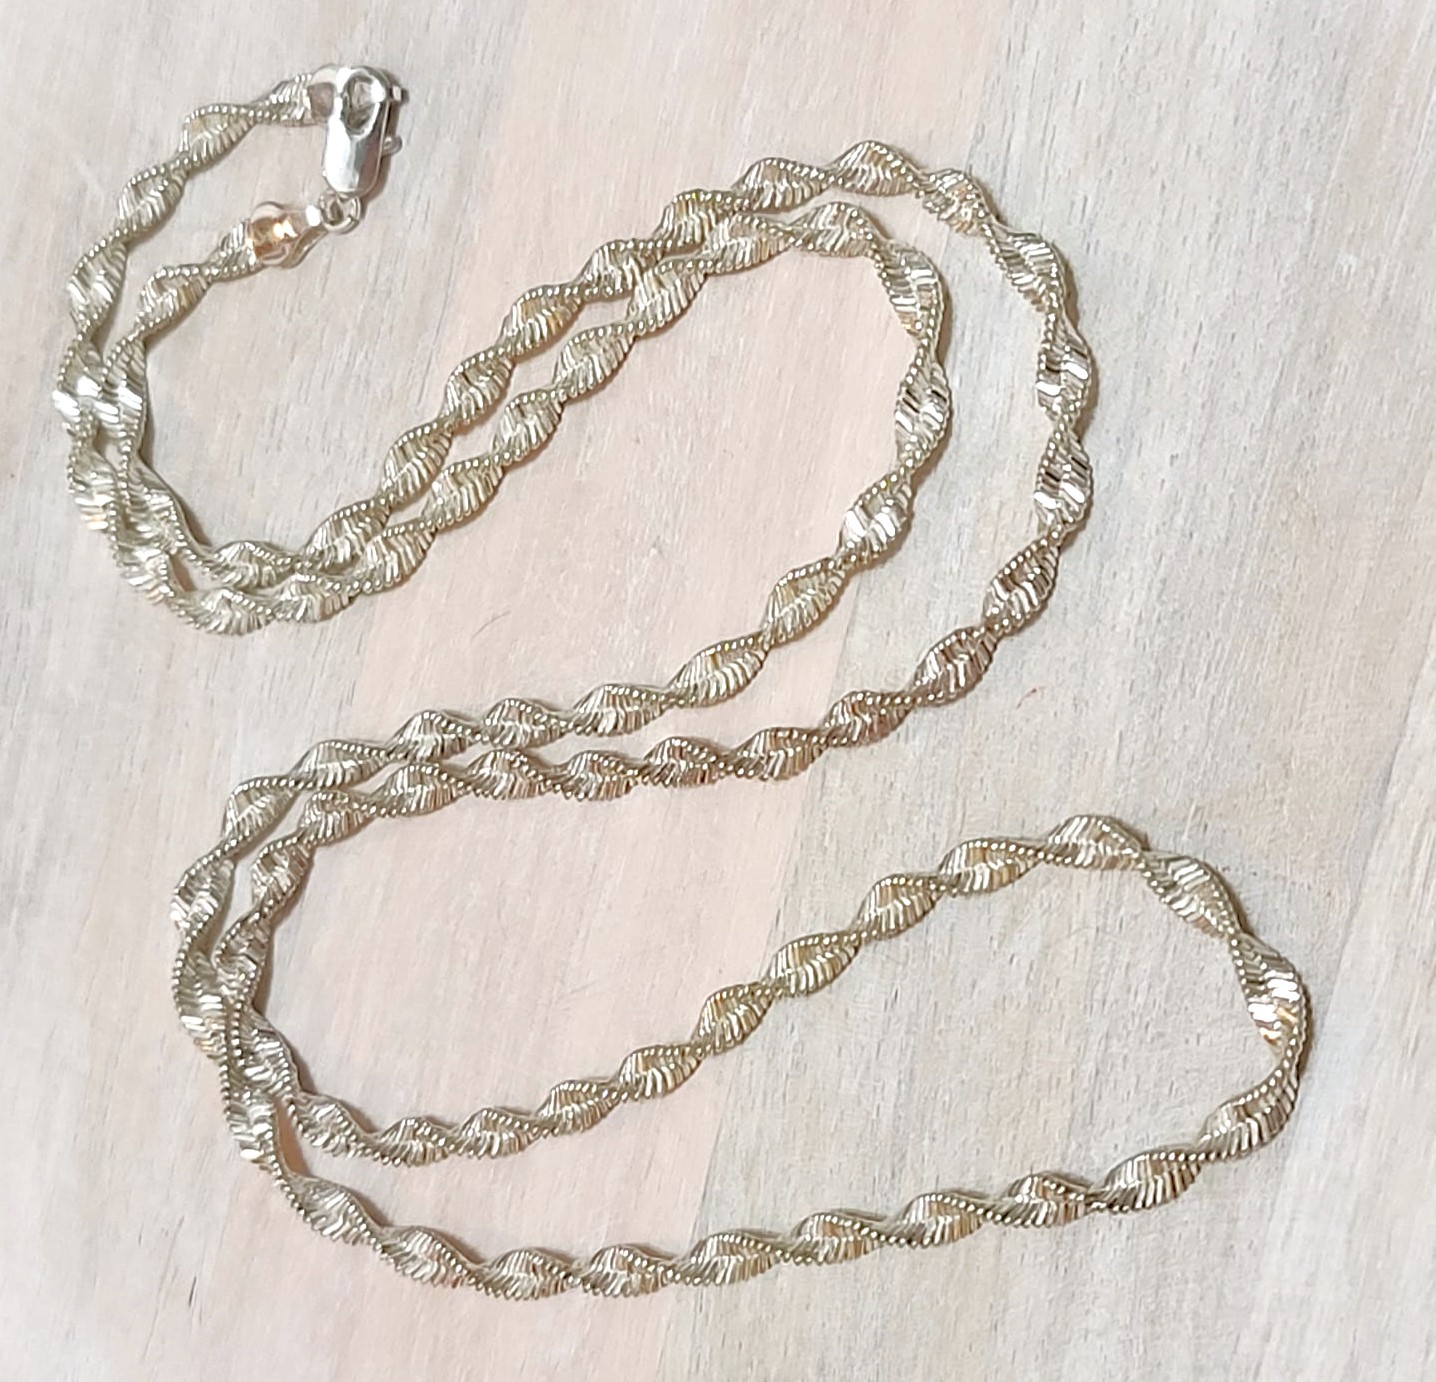 Twisted herringbone necklace, silver plated 30 inches long